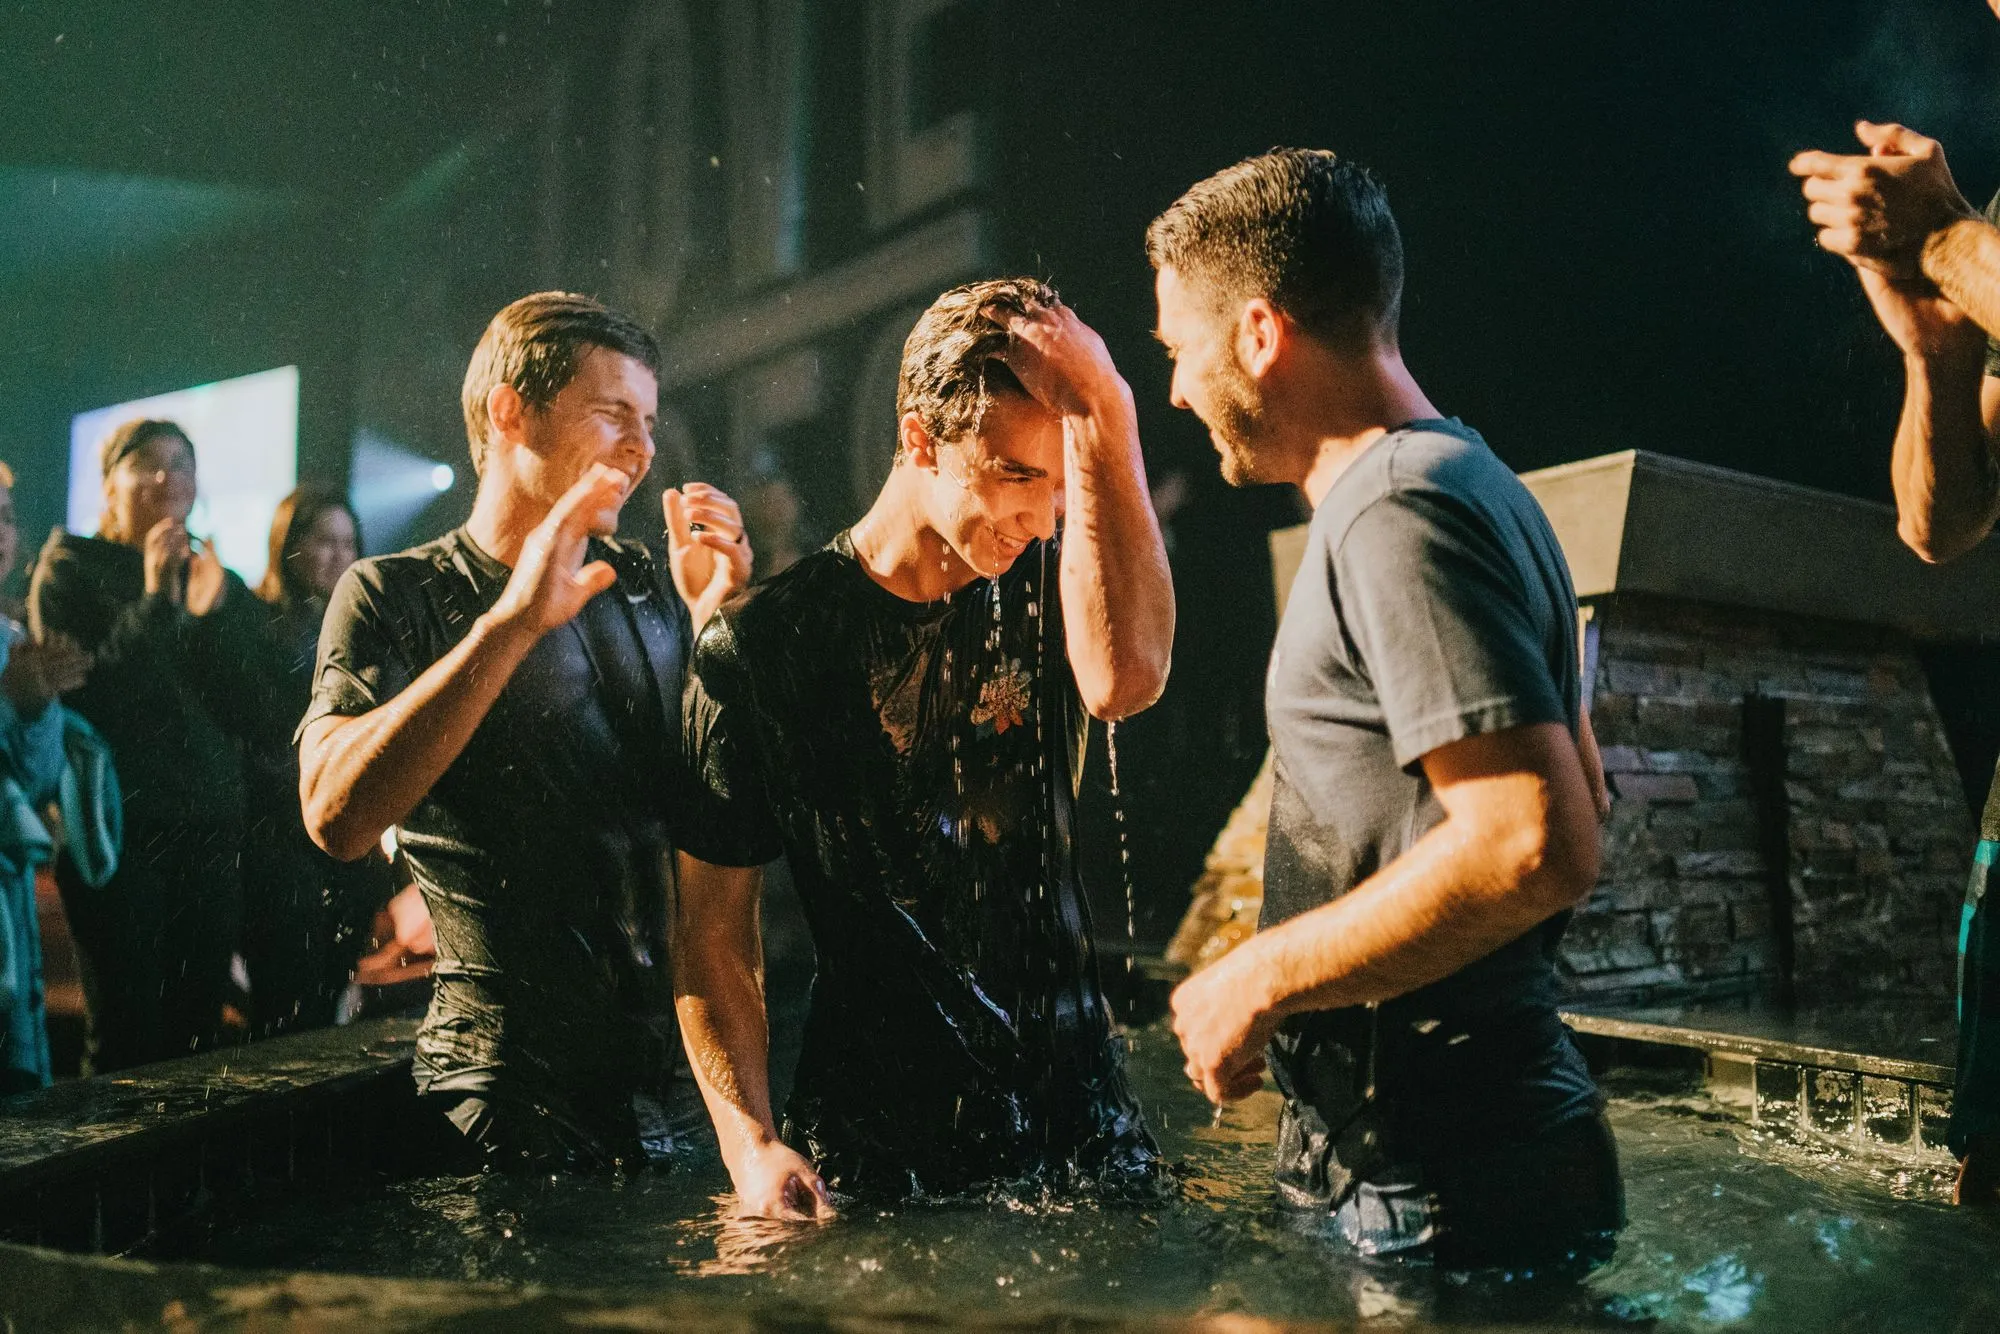 People baptize themselves under god's faith, teaching, and the holy spirit.